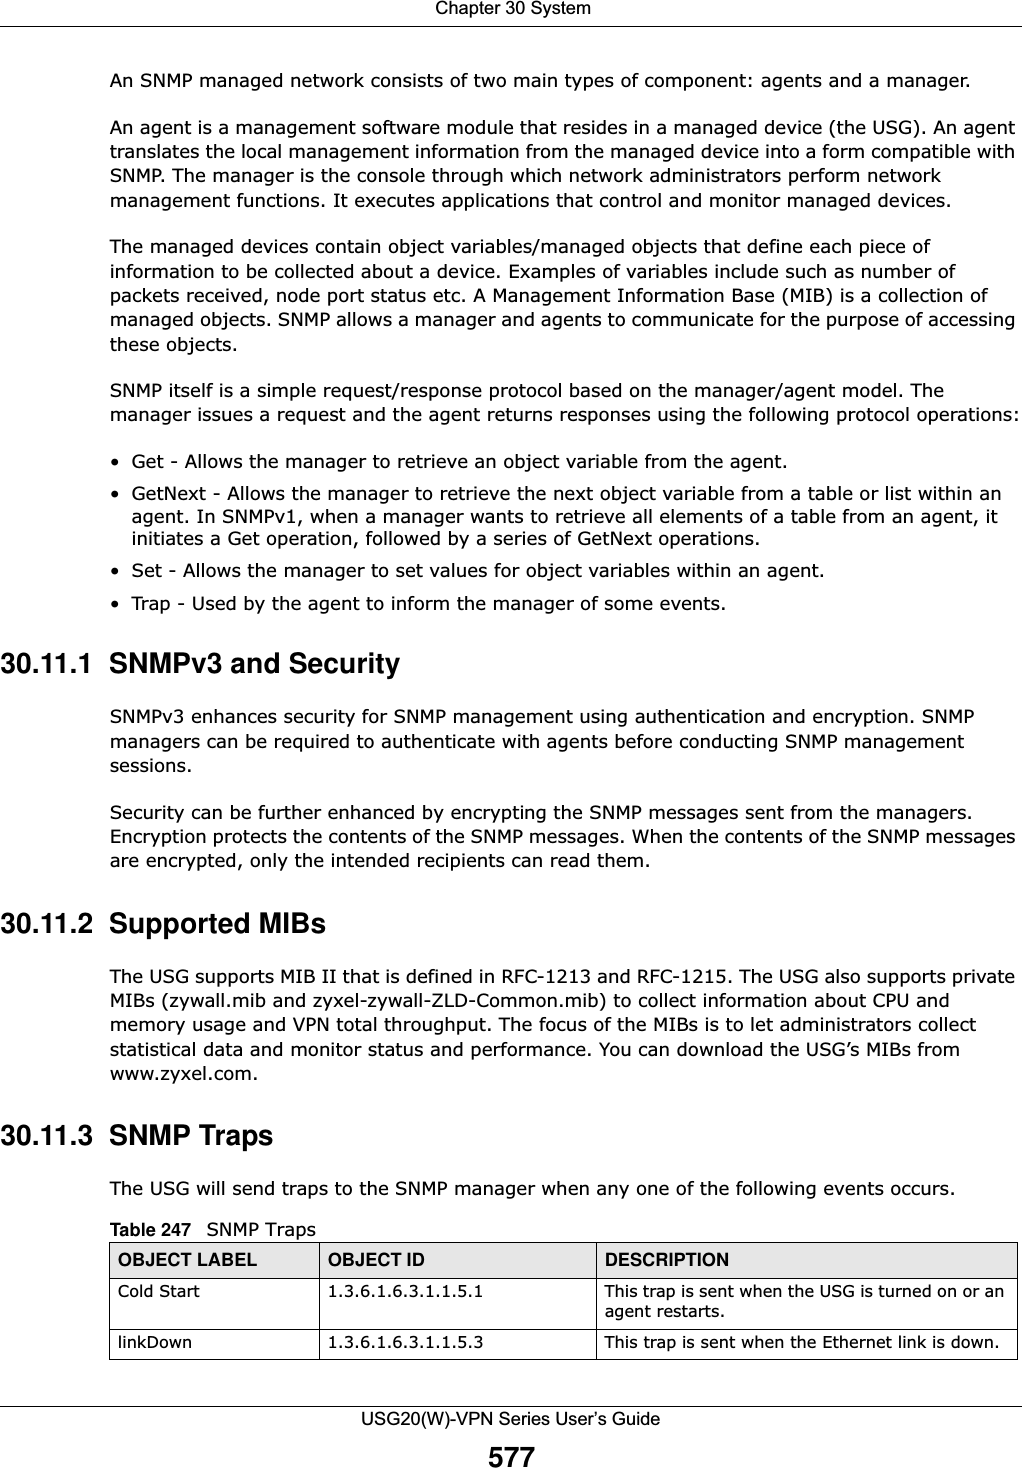  Chapter 30 SystemUSG20(W)-VPN Series User’s Guide577An SNMP managed network consists of two main types of component: agents and a manager. An agent is a management software module that resides in a managed device (the USG). An agent translates the local management information from the managed device into a form compatible with SNMP. The manager is the console through which network administrators perform network management functions. It executes applications that control and monitor managed devices. The managed devices contain object variables/managed objects that define each piece of information to be collected about a device. Examples of variables include such as number of packets received, node port status etc. A Management Information Base (MIB) is a collection of managed objects. SNMP allows a manager and agents to communicate for the purpose of accessing these objects.SNMP itself is a simple request/response protocol based on the manager/agent model. The manager issues a request and the agent returns responses using the following protocol operations:• Get - Allows the manager to retrieve an object variable from the agent. • GetNext - Allows the manager to retrieve the next object variable from a table or list within an agent. In SNMPv1, when a manager wants to retrieve all elements of a table from an agent, it initiates a Get operation, followed by a series of GetNext operations. • Set - Allows the manager to set values for object variables within an agent. • Trap - Used by the agent to inform the manager of some events.30.11.1  SNMPv3 and SecuritySNMPv3 enhances security for SNMP management using authentication and encryption. SNMP managers can be required to authenticate with agents before conducting SNMP management sessions.Security can be further enhanced by encrypting the SNMP messages sent from the managers. Encryption protects the contents of the SNMP messages. When the contents of the SNMP messages are encrypted, only the intended recipients can read them. 30.11.2  Supported MIBsThe USG supports MIB II that is defined in RFC-1213 and RFC-1215. The USG also supports private MIBs (zywall.mib and zyxel-zywall-ZLD-Common.mib) to collect information about CPU and memory usage and VPN total throughput. The focus of the MIBs is to let administrators collect statistical data and monitor status and performance. You can download the USG’s MIBs from www.zyxel.com.30.11.3  SNMP TrapsThe USG will send traps to the SNMP manager when any one of the following events occurs.Table 247   SNMP TrapsOBJECT LABEL OBJECT ID DESCRIPTIONCold Start 1.3.6.1.6.3.1.1.5.1 This trap is sent when the USG is turned on or an agent restarts.linkDown 1.3.6.1.6.3.1.1.5.3 This trap is sent when the Ethernet link is down.